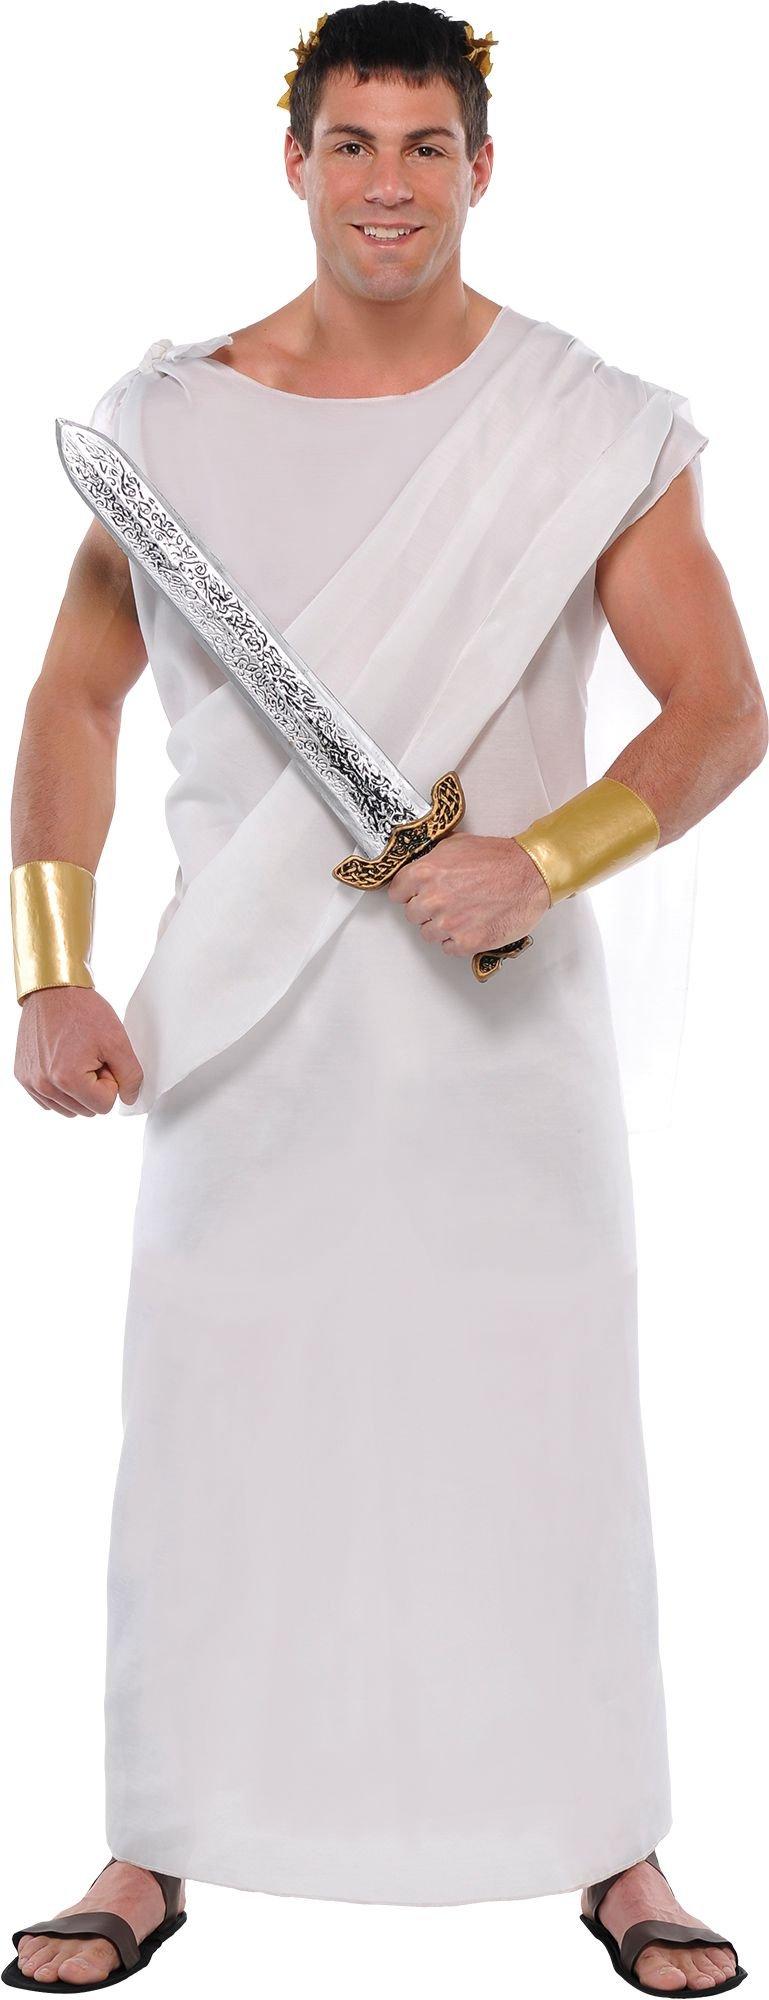 sexy toga party costume